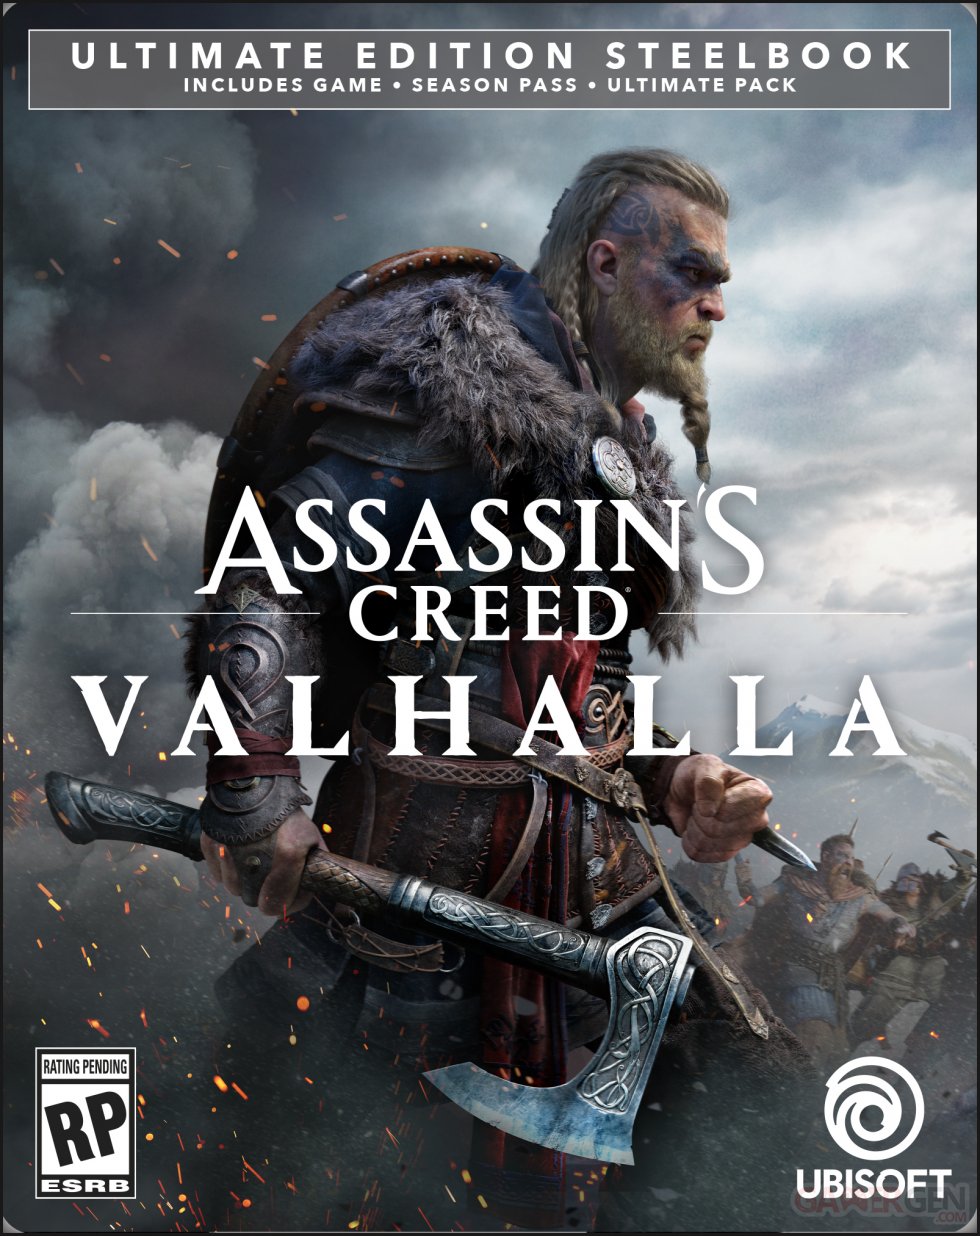 Assassin's Creed Valhalla images (6)